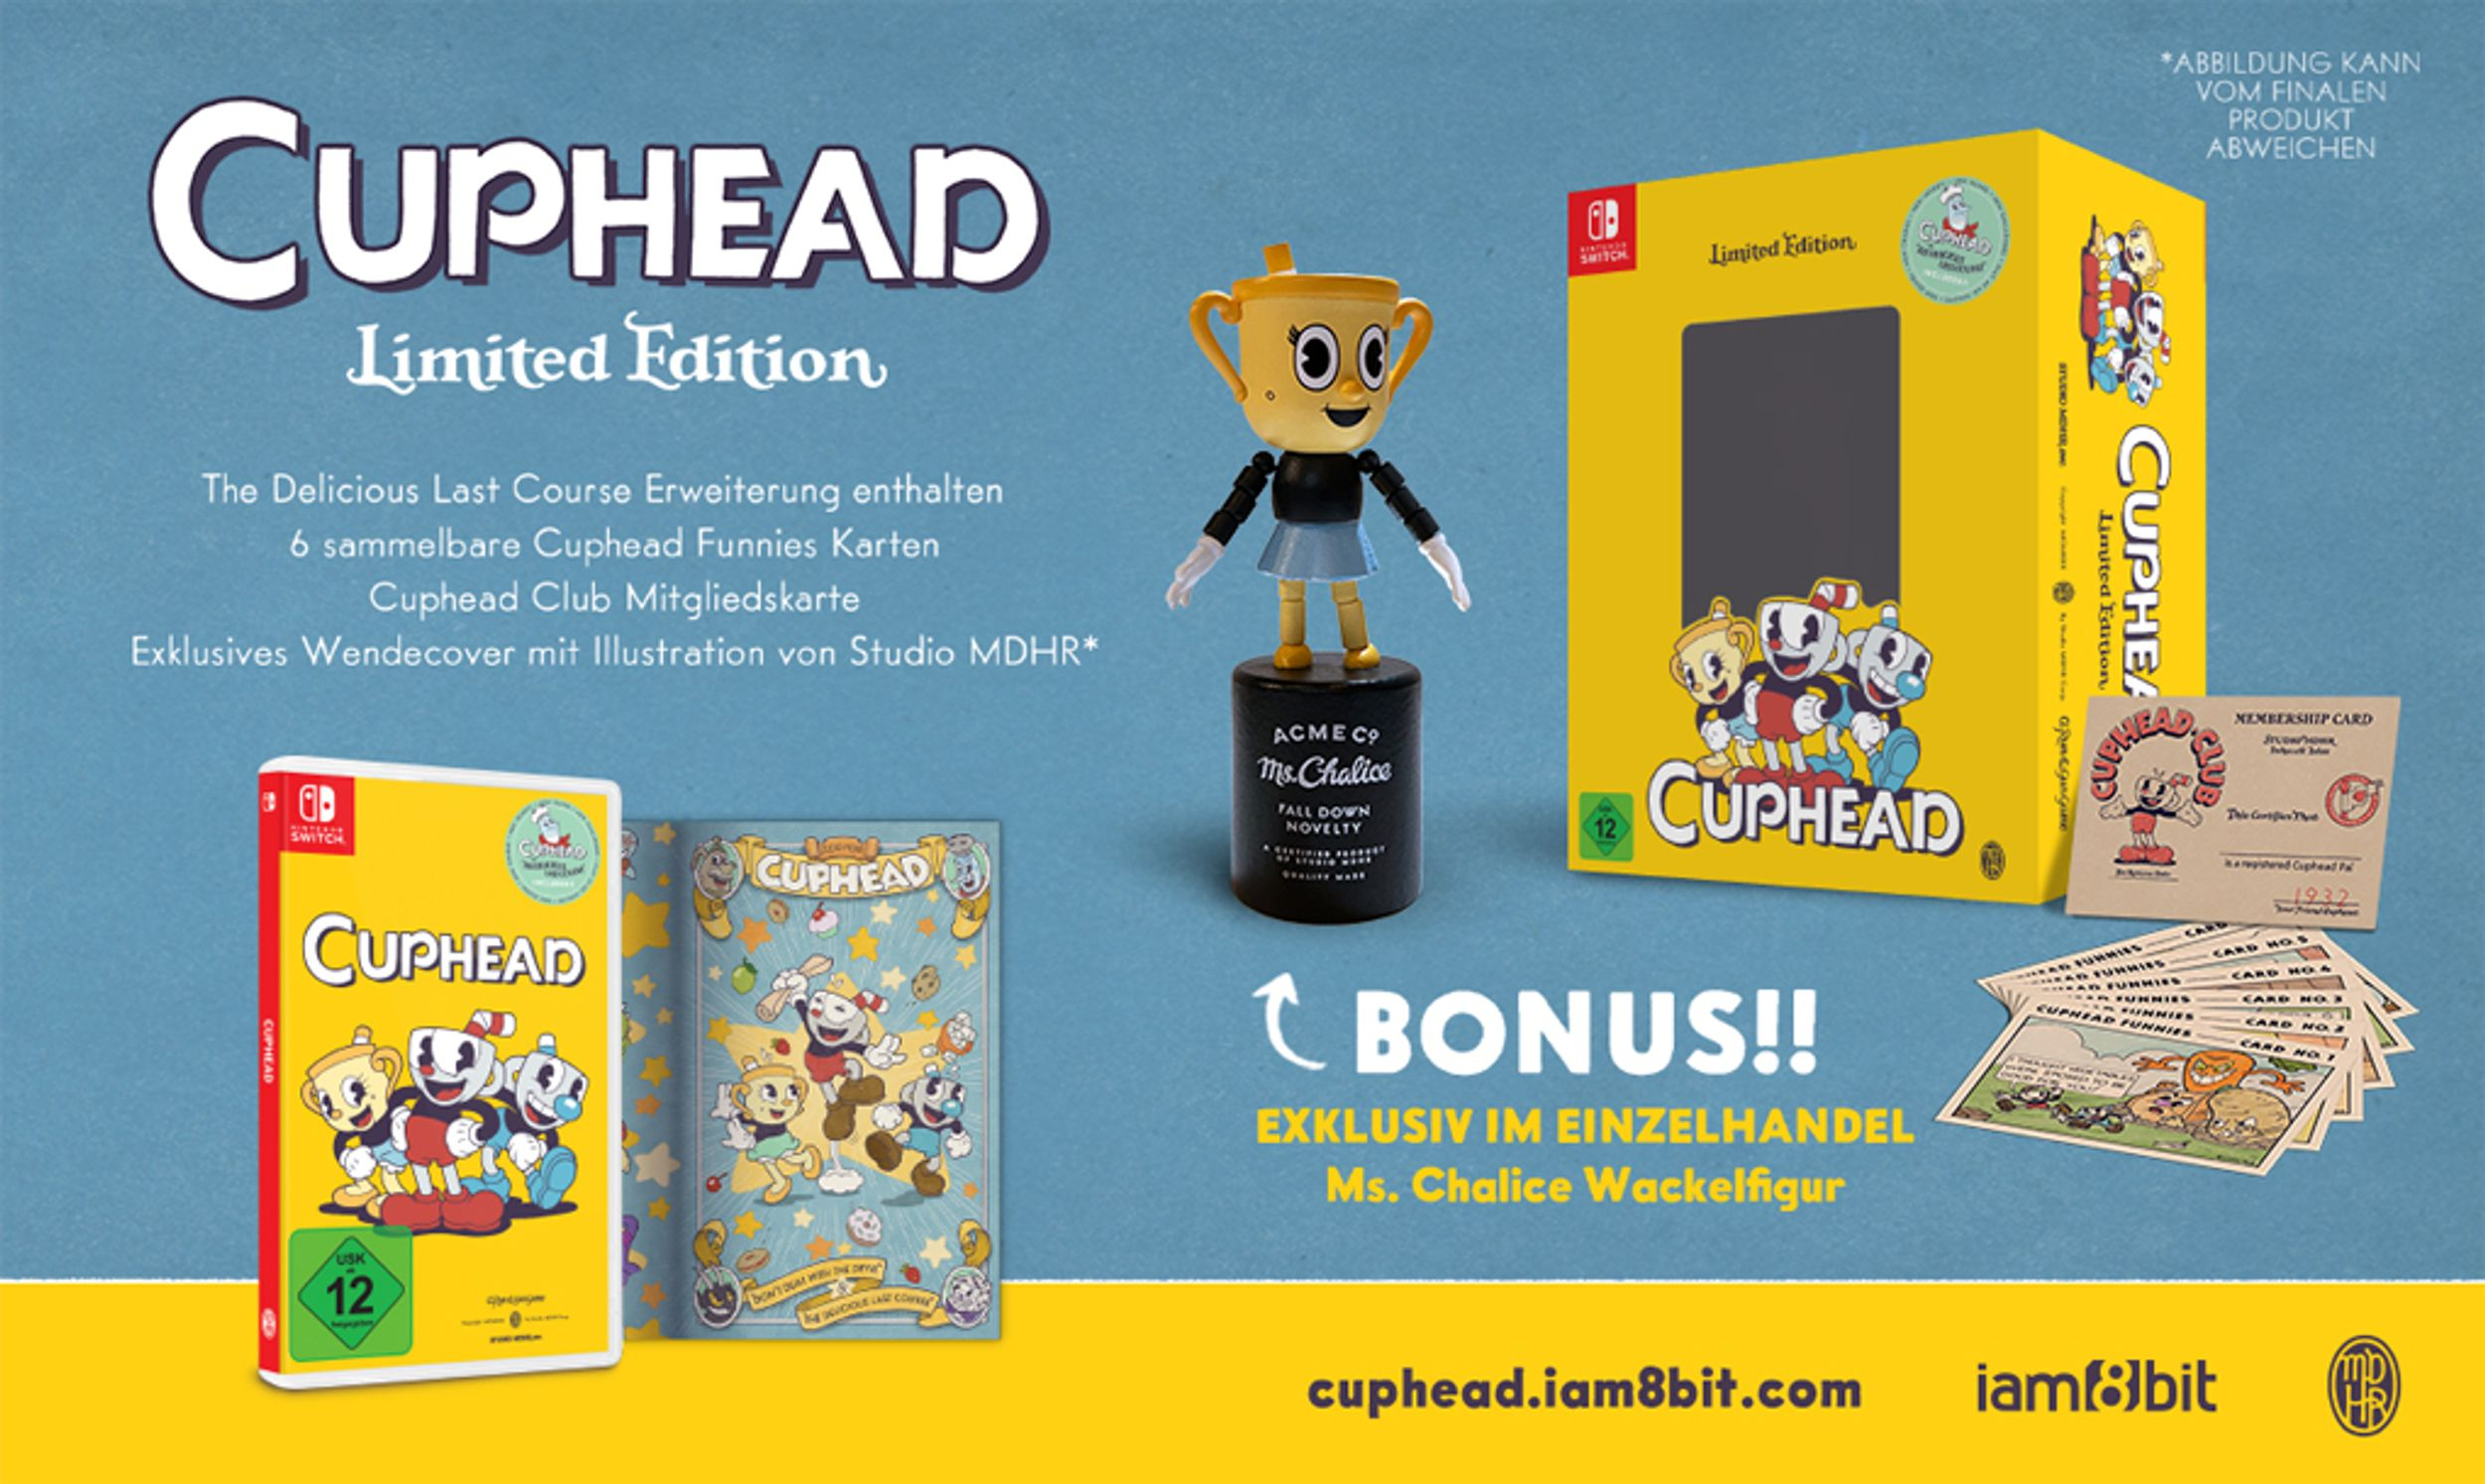 CUPHEAD EDITION) (LIMITED [Nintendo SW Switch] -